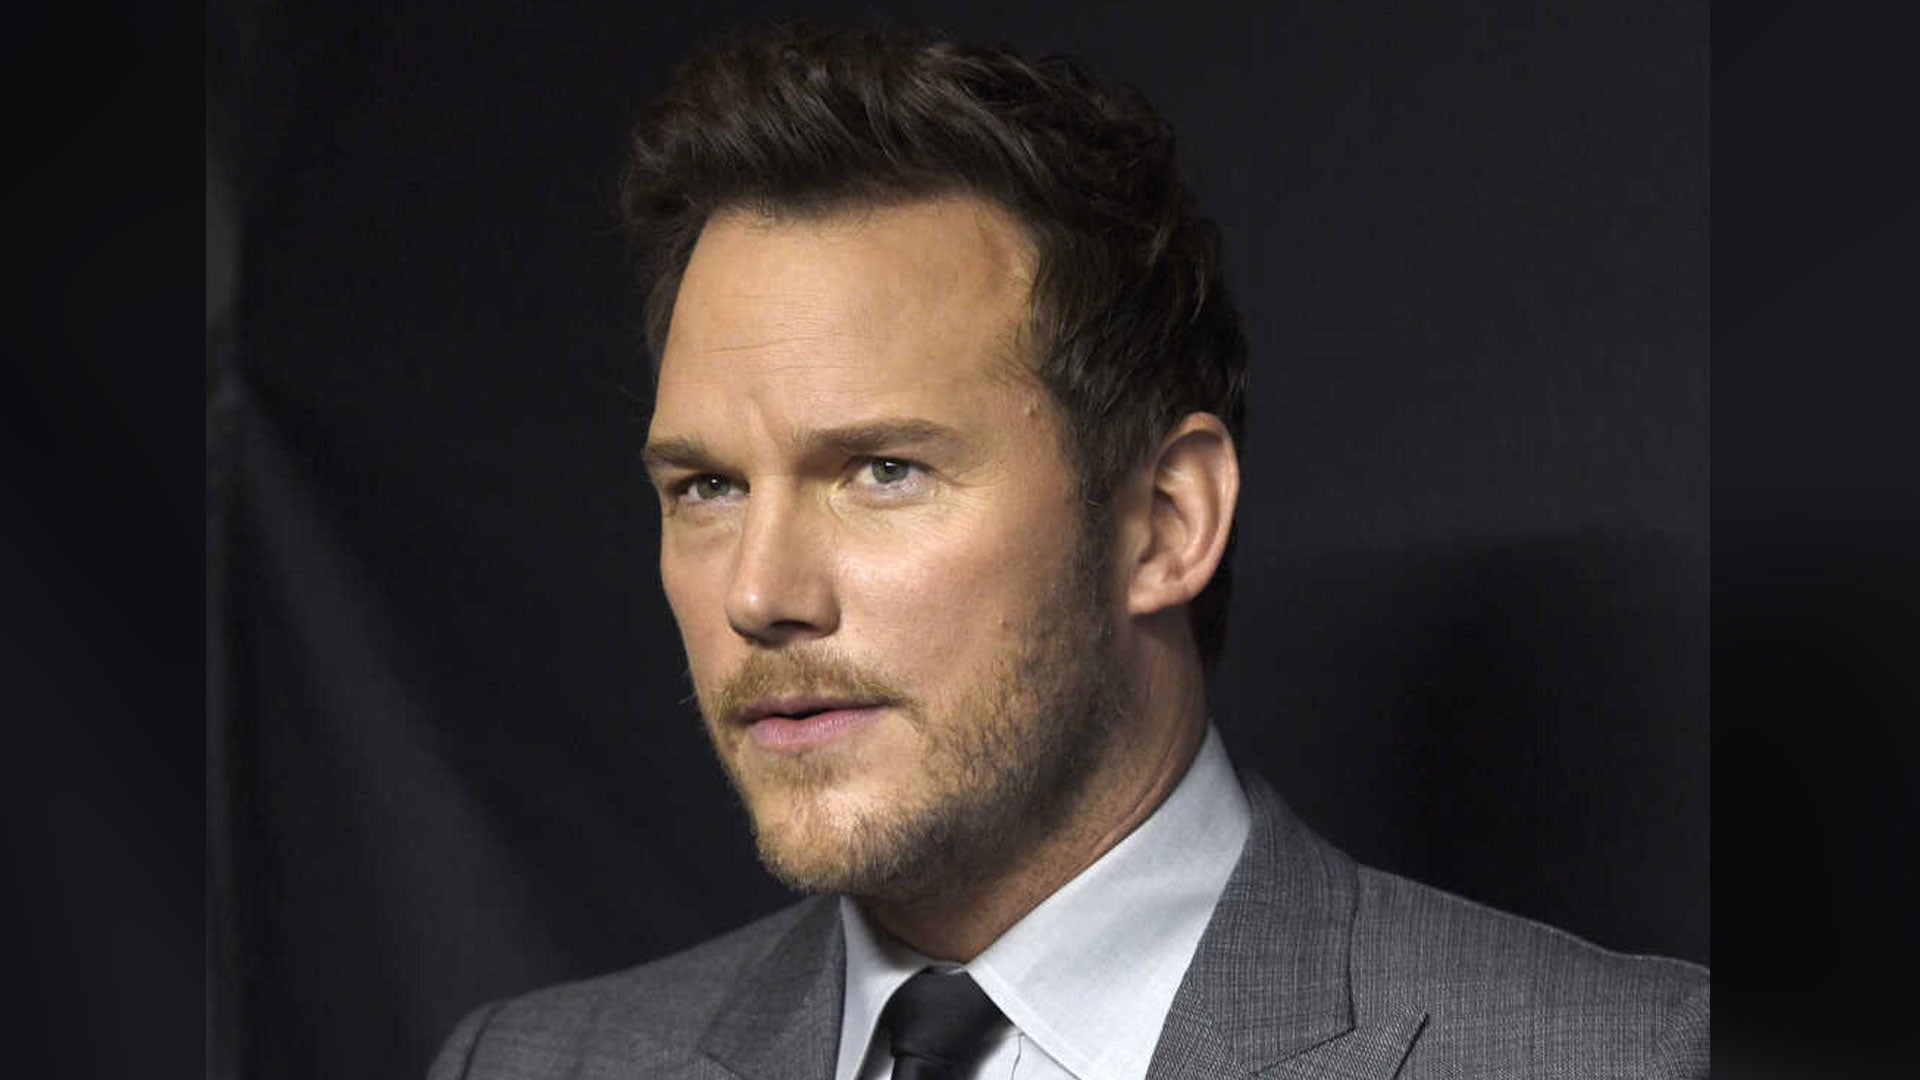 Chris Pratt has been bizarrely labeled a ‘disgraced actor’ by a reporter, revealing Joe Rogan has it all figured out